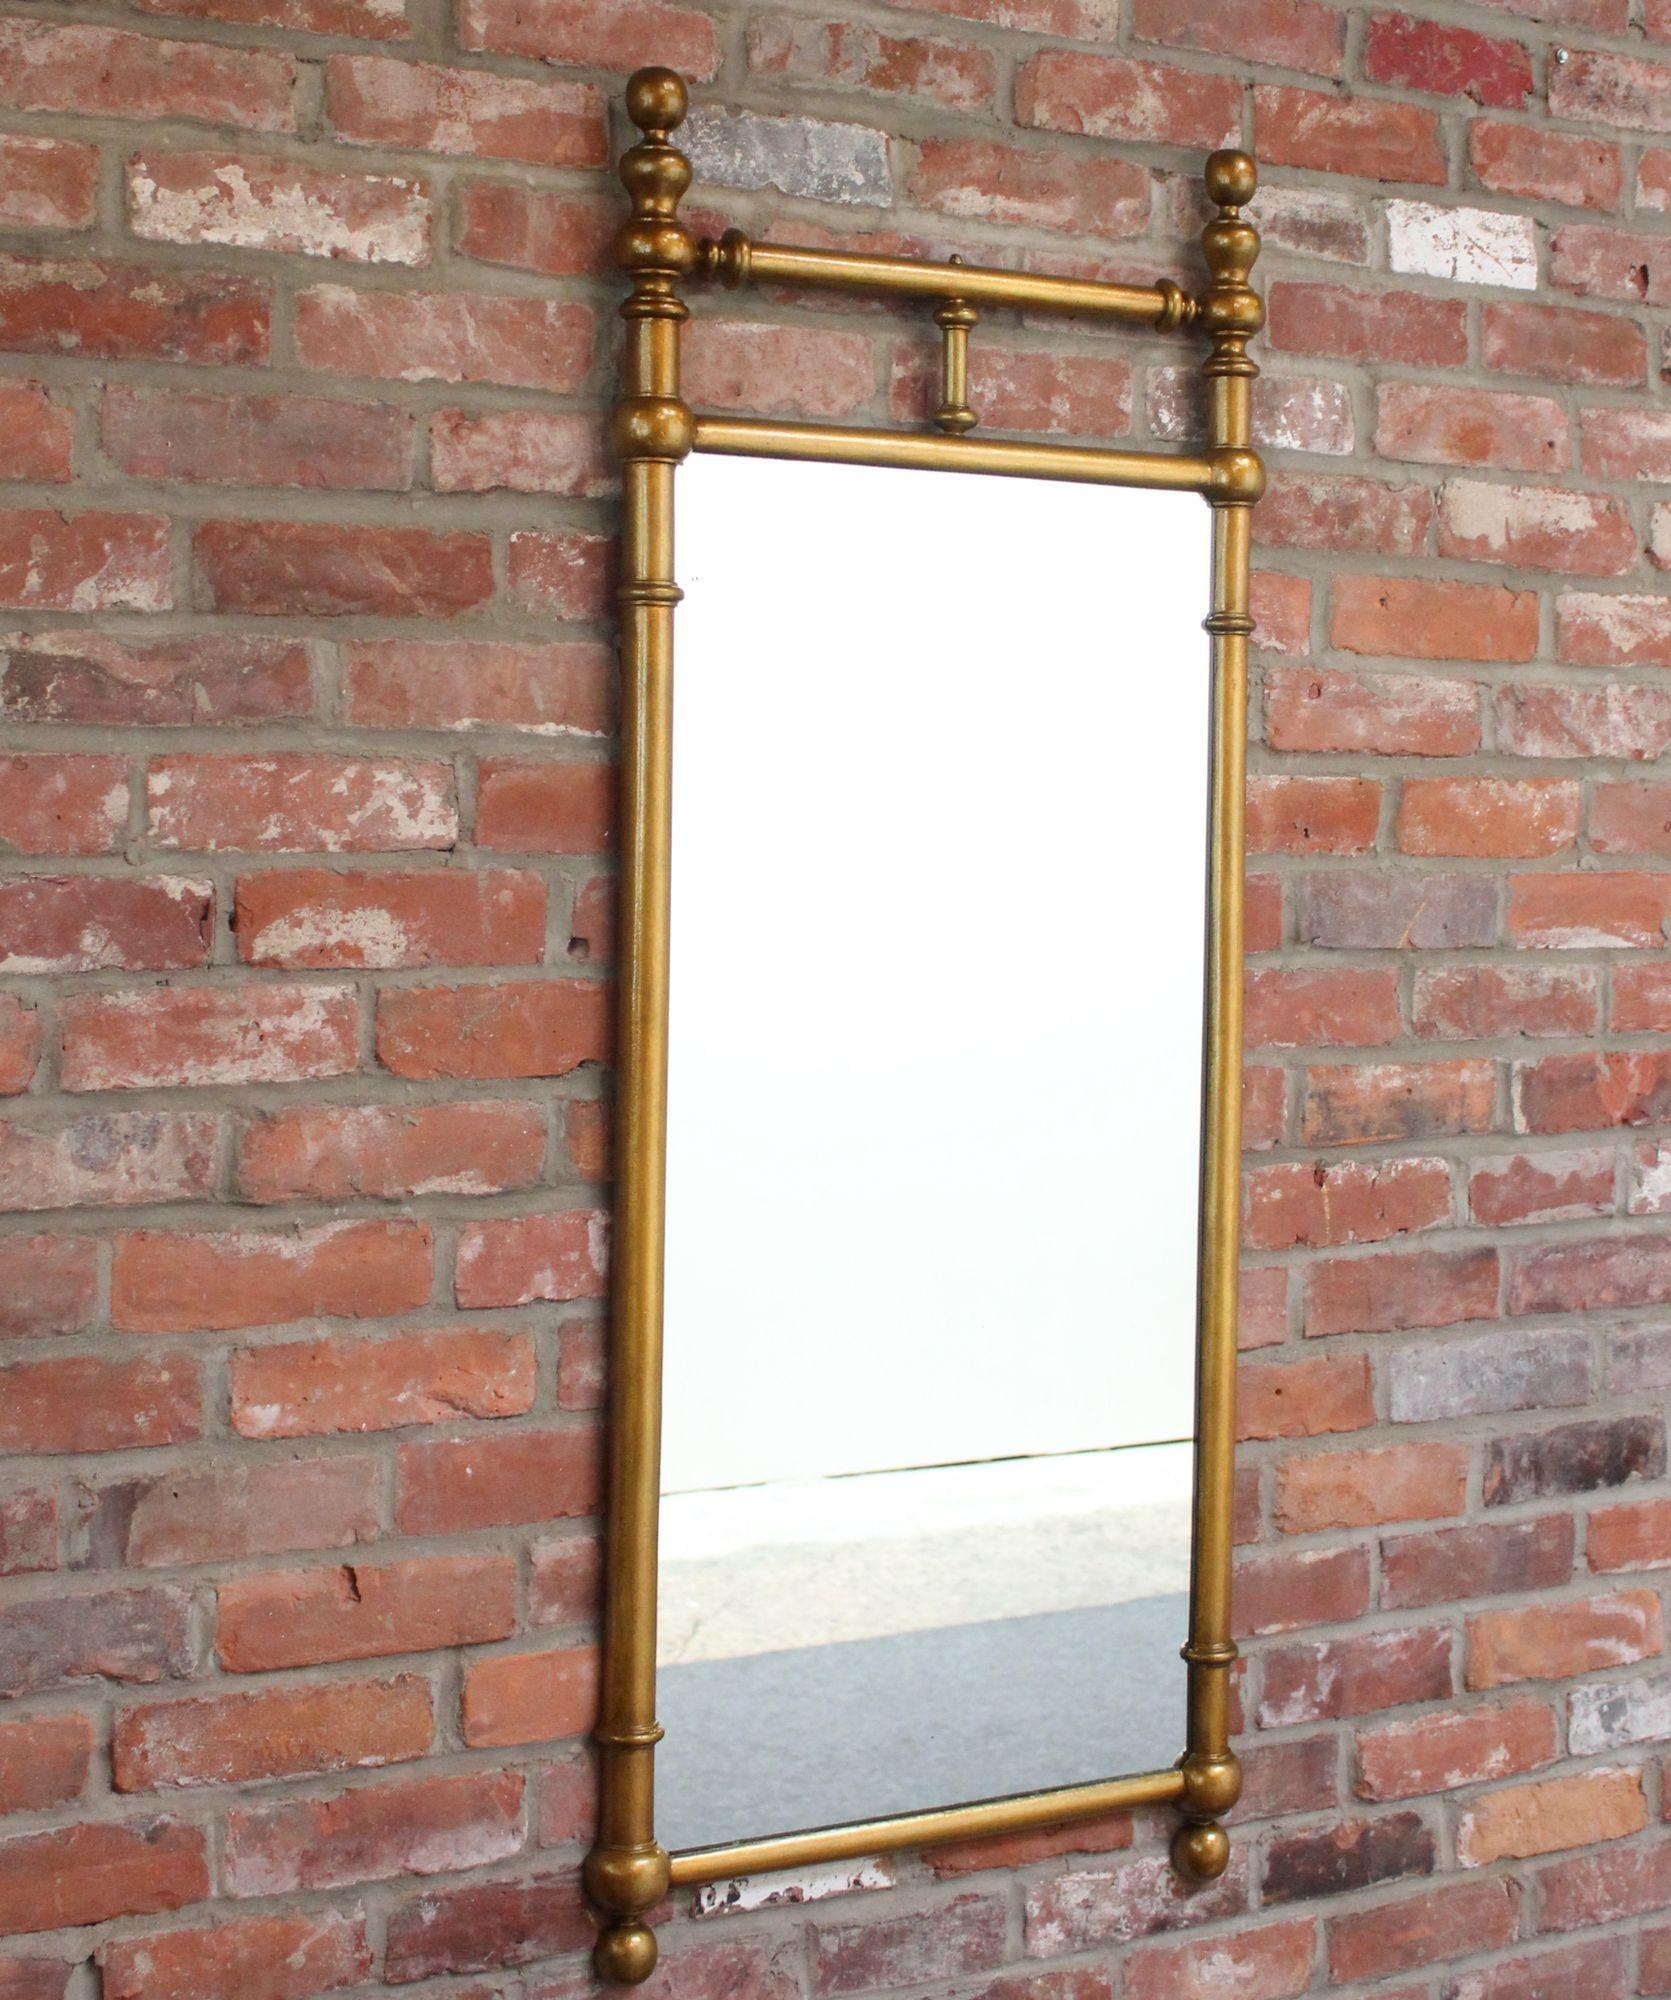 Ornate decorative wall mirror with cast gilt-metal frame.
Elegant, unique piece with rich patina to the gilt and a couple of glass scratches present along with light surface scuffing. Does not affect the clarity of the glass (maintains a clear